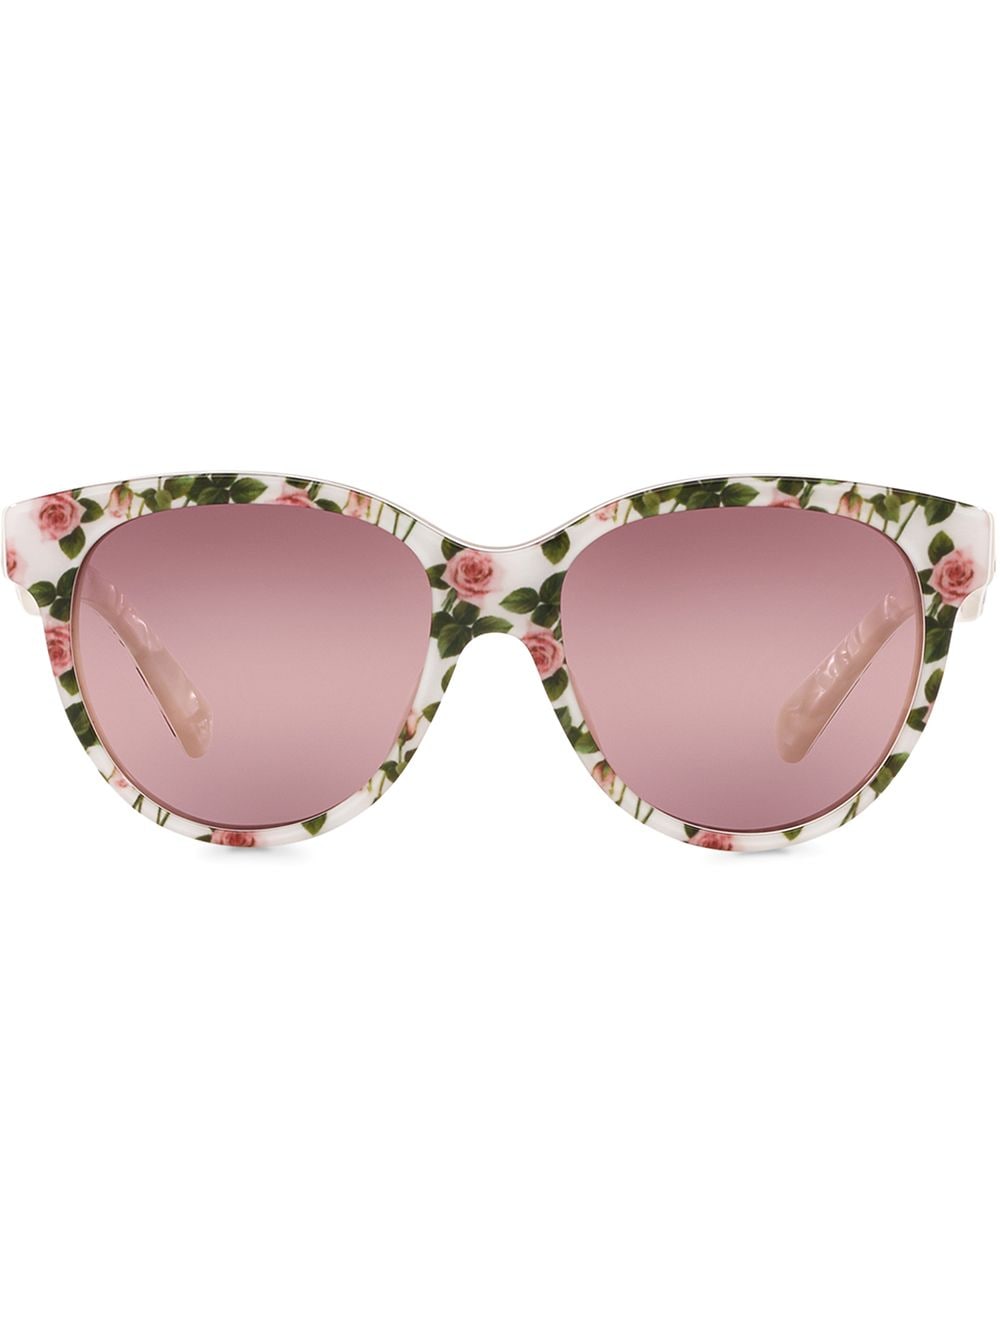 Dolce & Gabbana Kids' Tropical Rose Round-frame Sunglasses In Pink